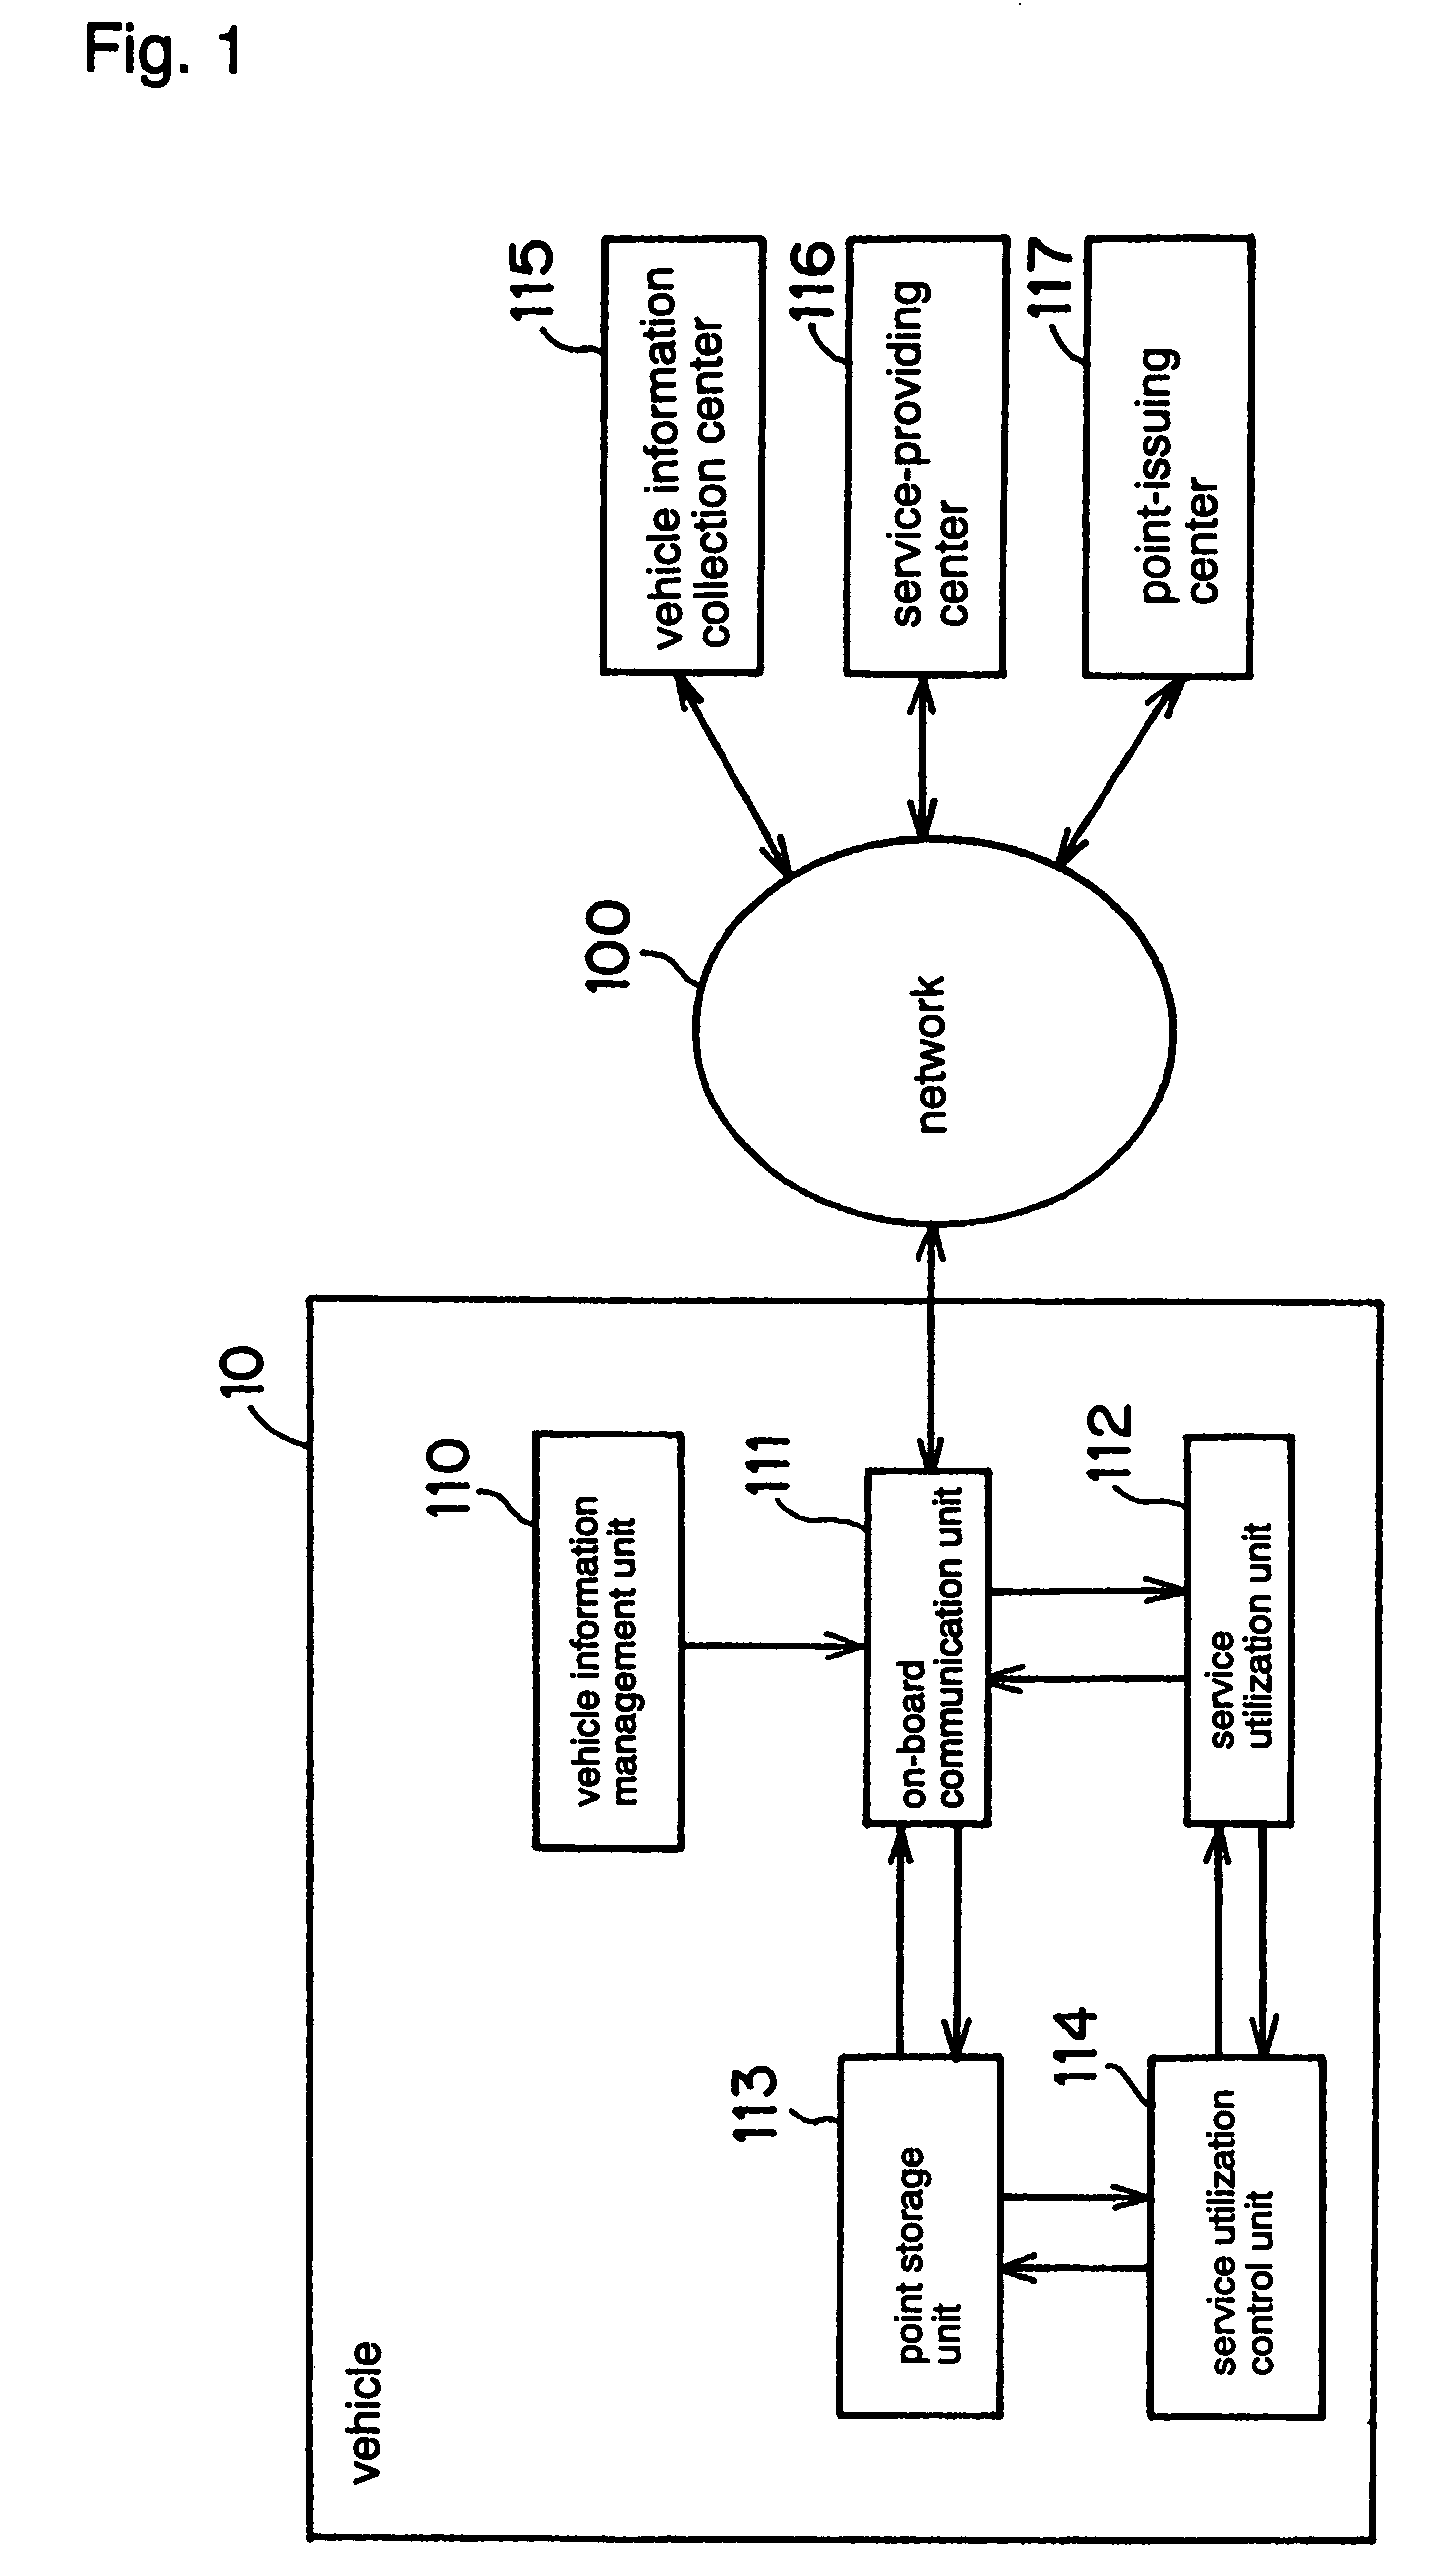 Vehicle information collection system having point issuing device